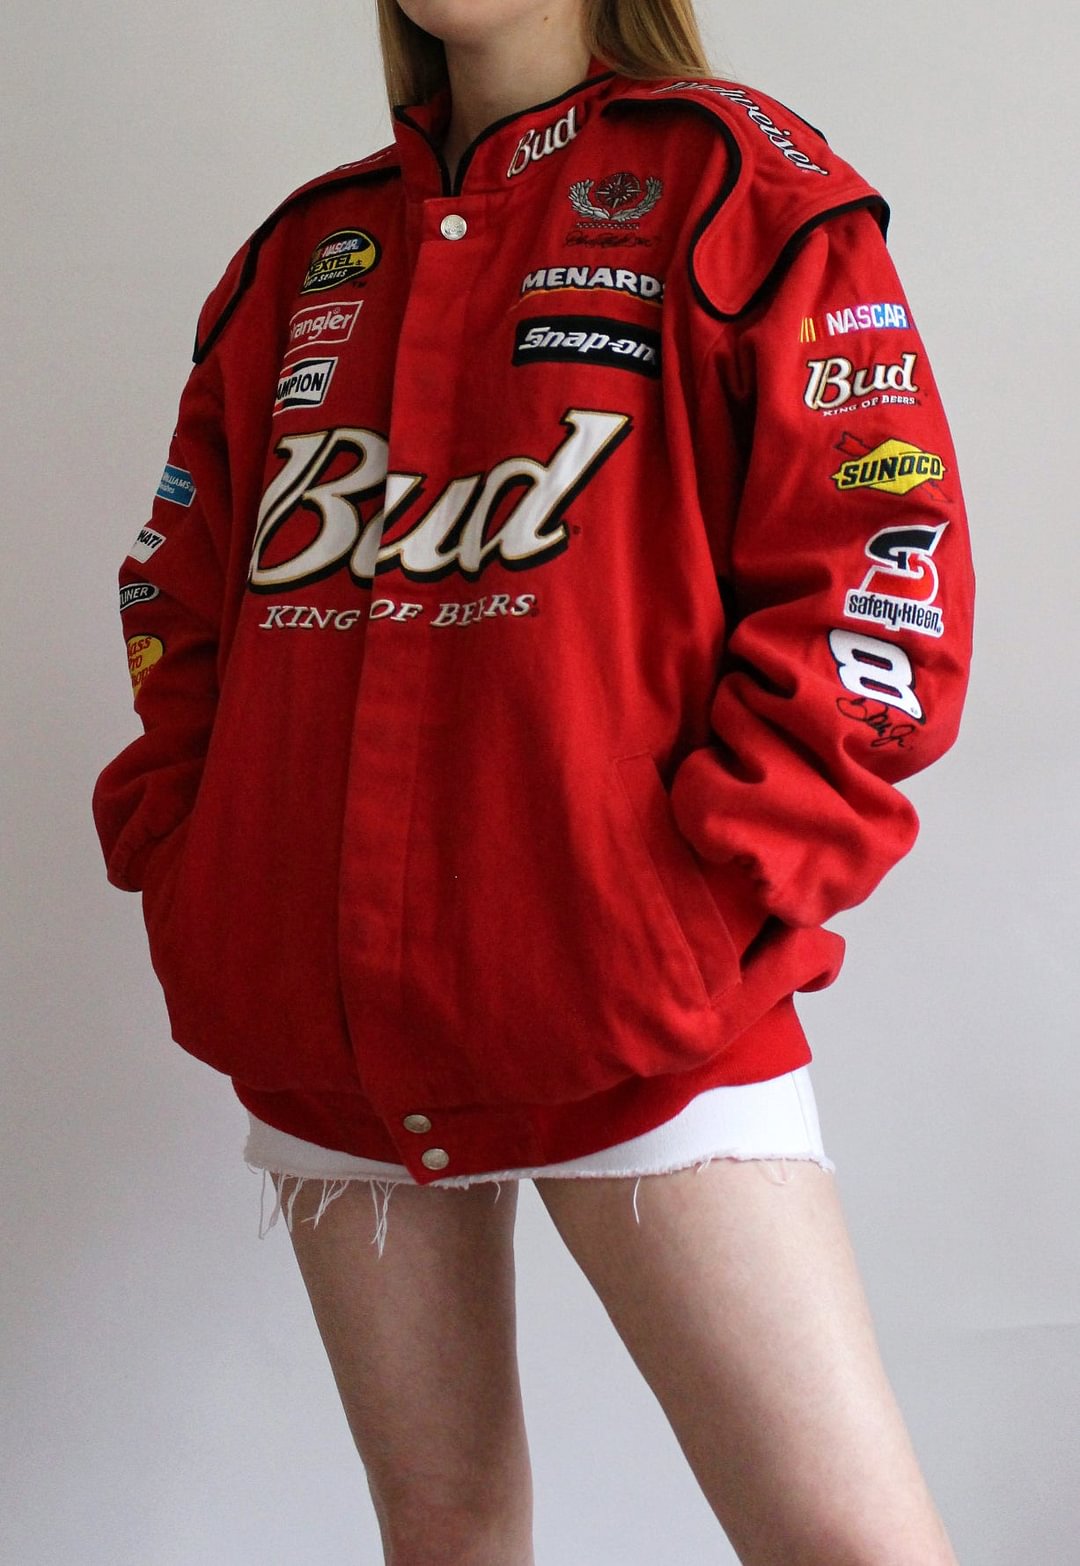 Vintage Red Chase Authentics Budweiser Racing Jacket